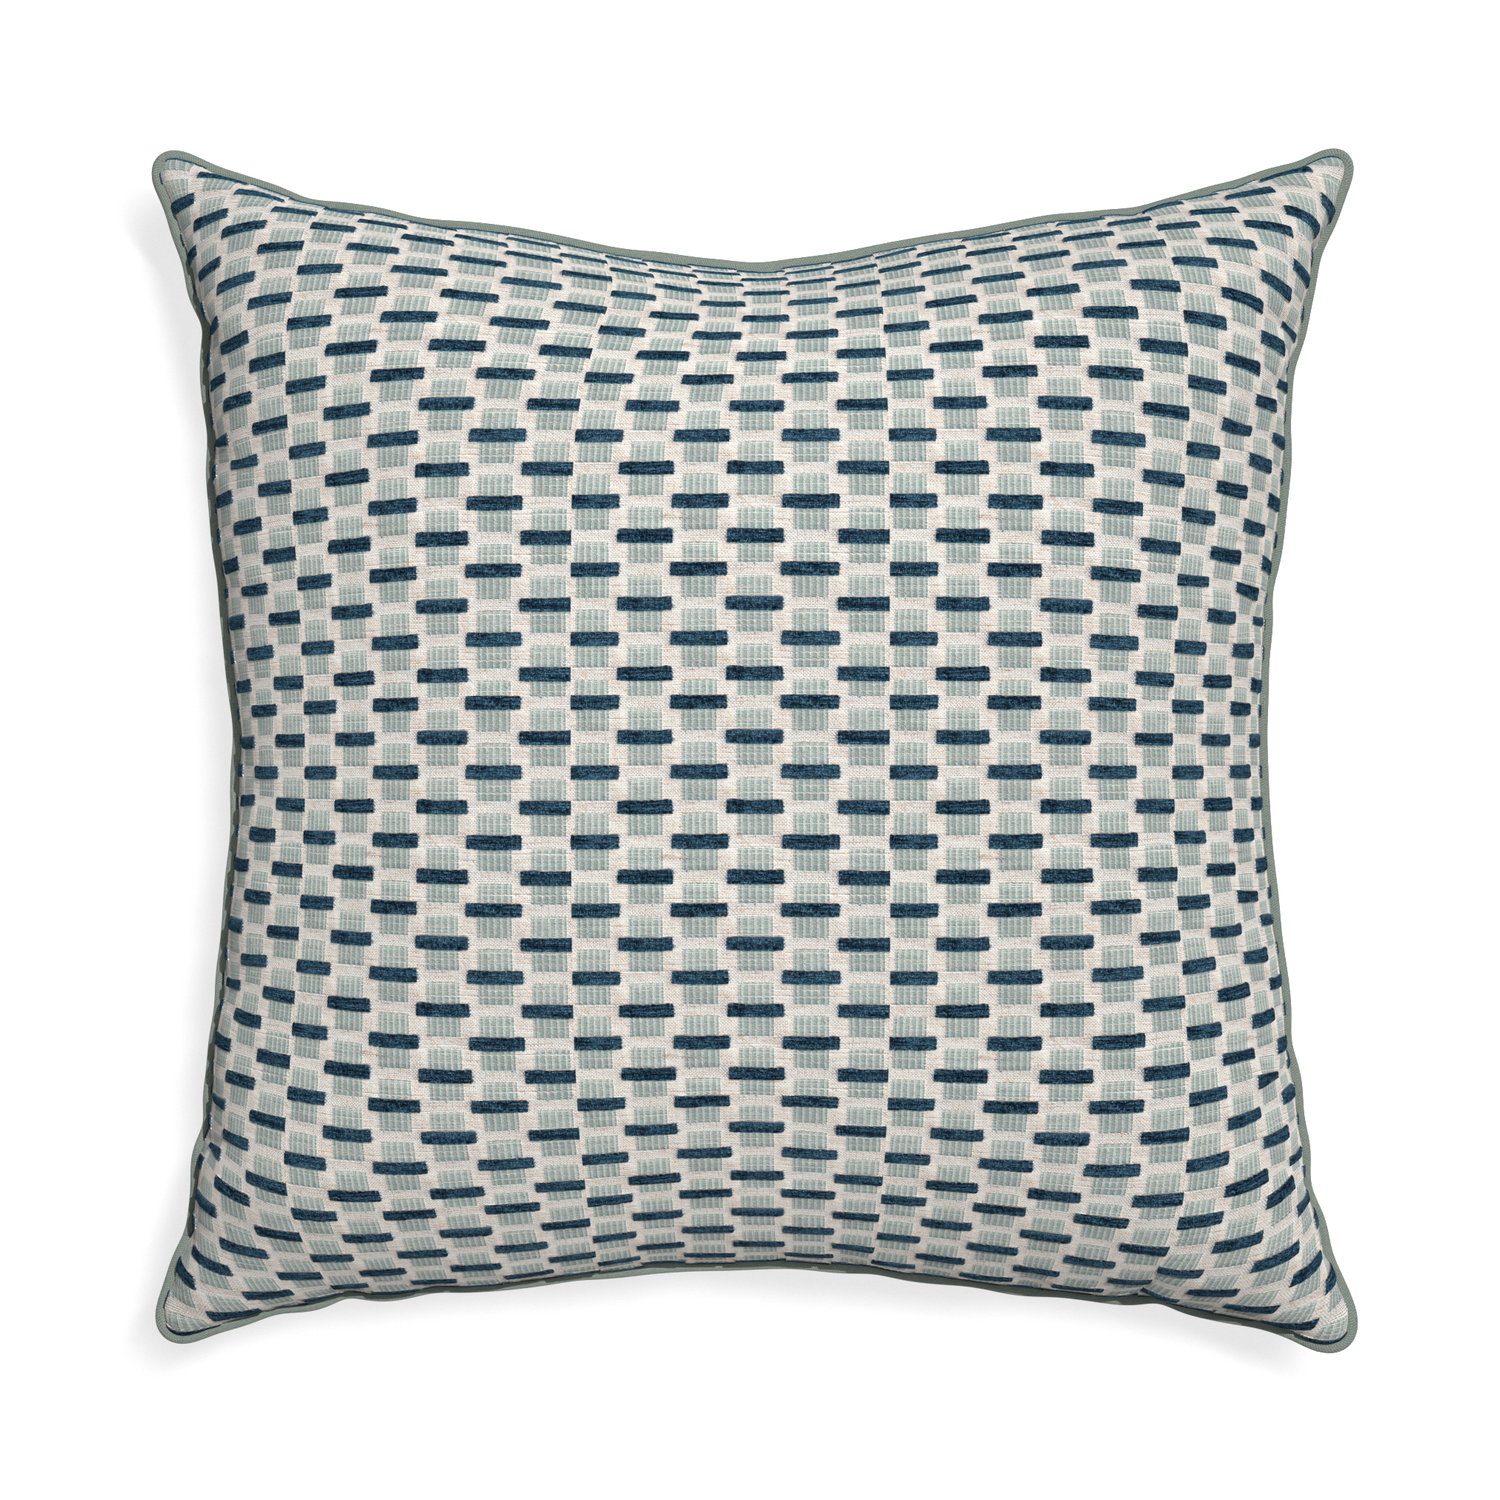 Euro-sham willow amalfi custom blue geometric chenillepillow with sage piping on white background